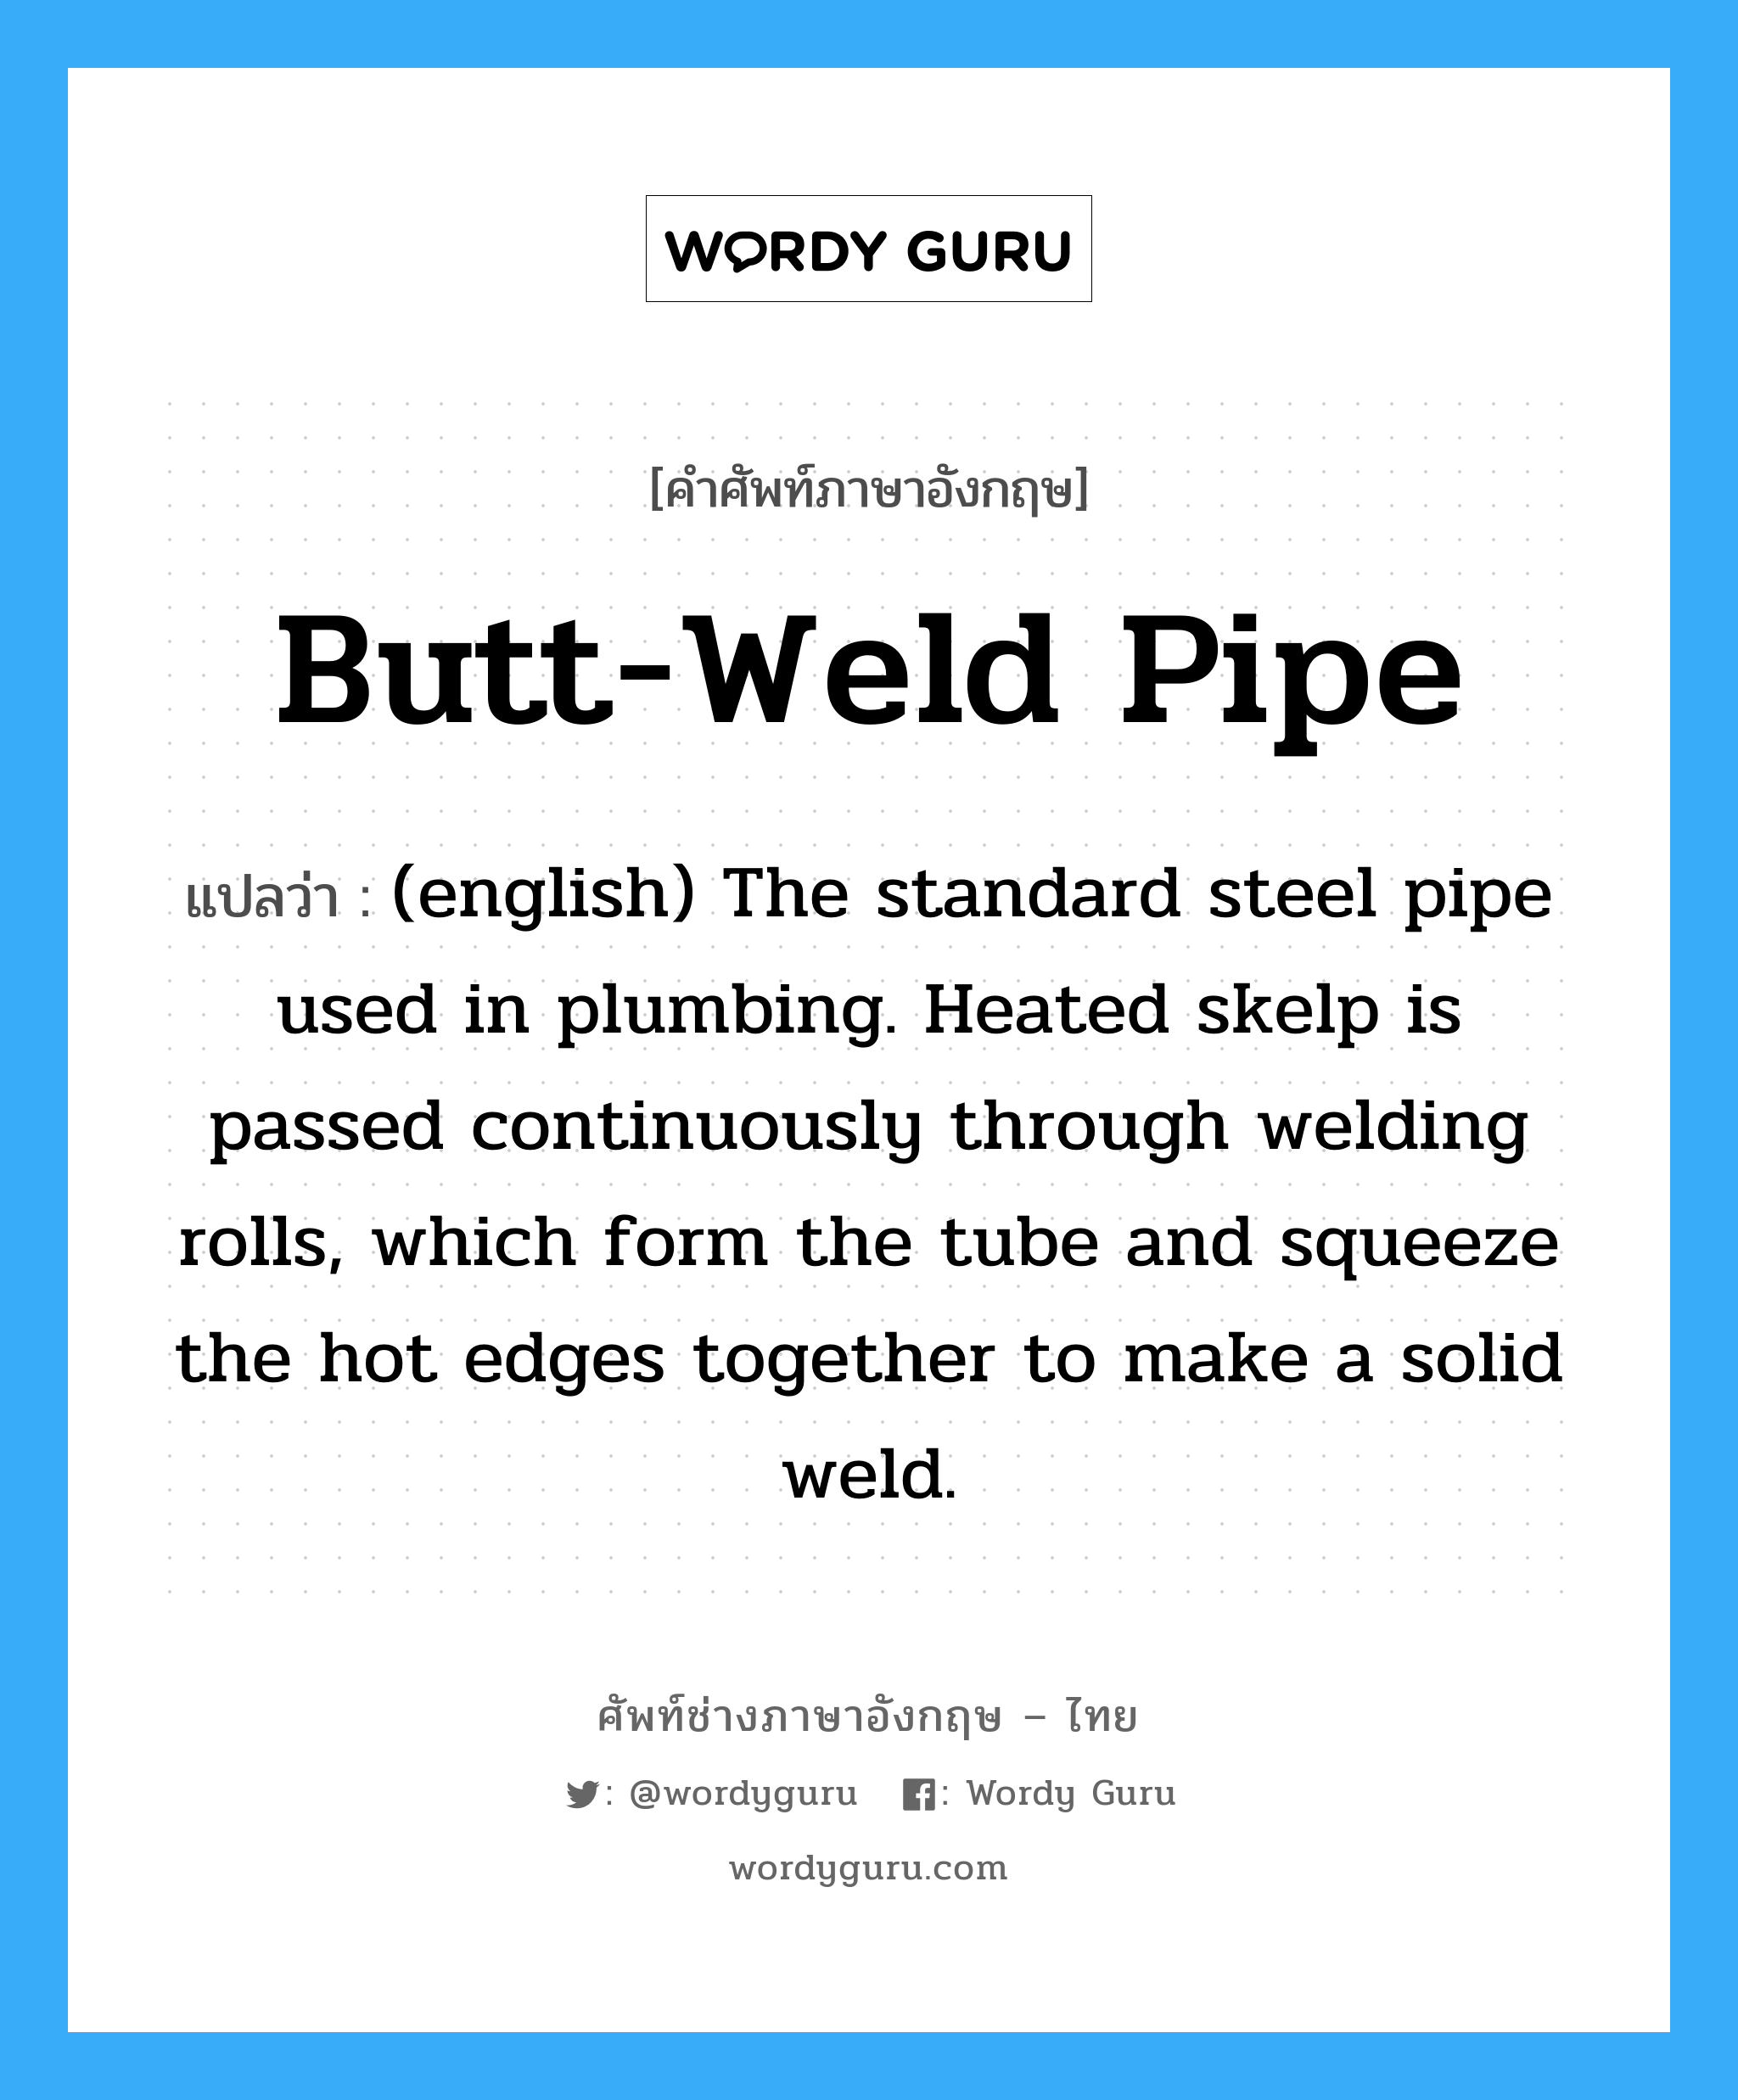 Butt-Weld Pipe แปลว่า?, คำศัพท์ช่างภาษาอังกฤษ - ไทย Butt-Weld Pipe คำศัพท์ภาษาอังกฤษ Butt-Weld Pipe แปลว่า (english) The standard steel pipe used in plumbing. Heated skelp is passed continuously through welding rolls, which form the tube and squeeze the hot edges together to make a solid weld.